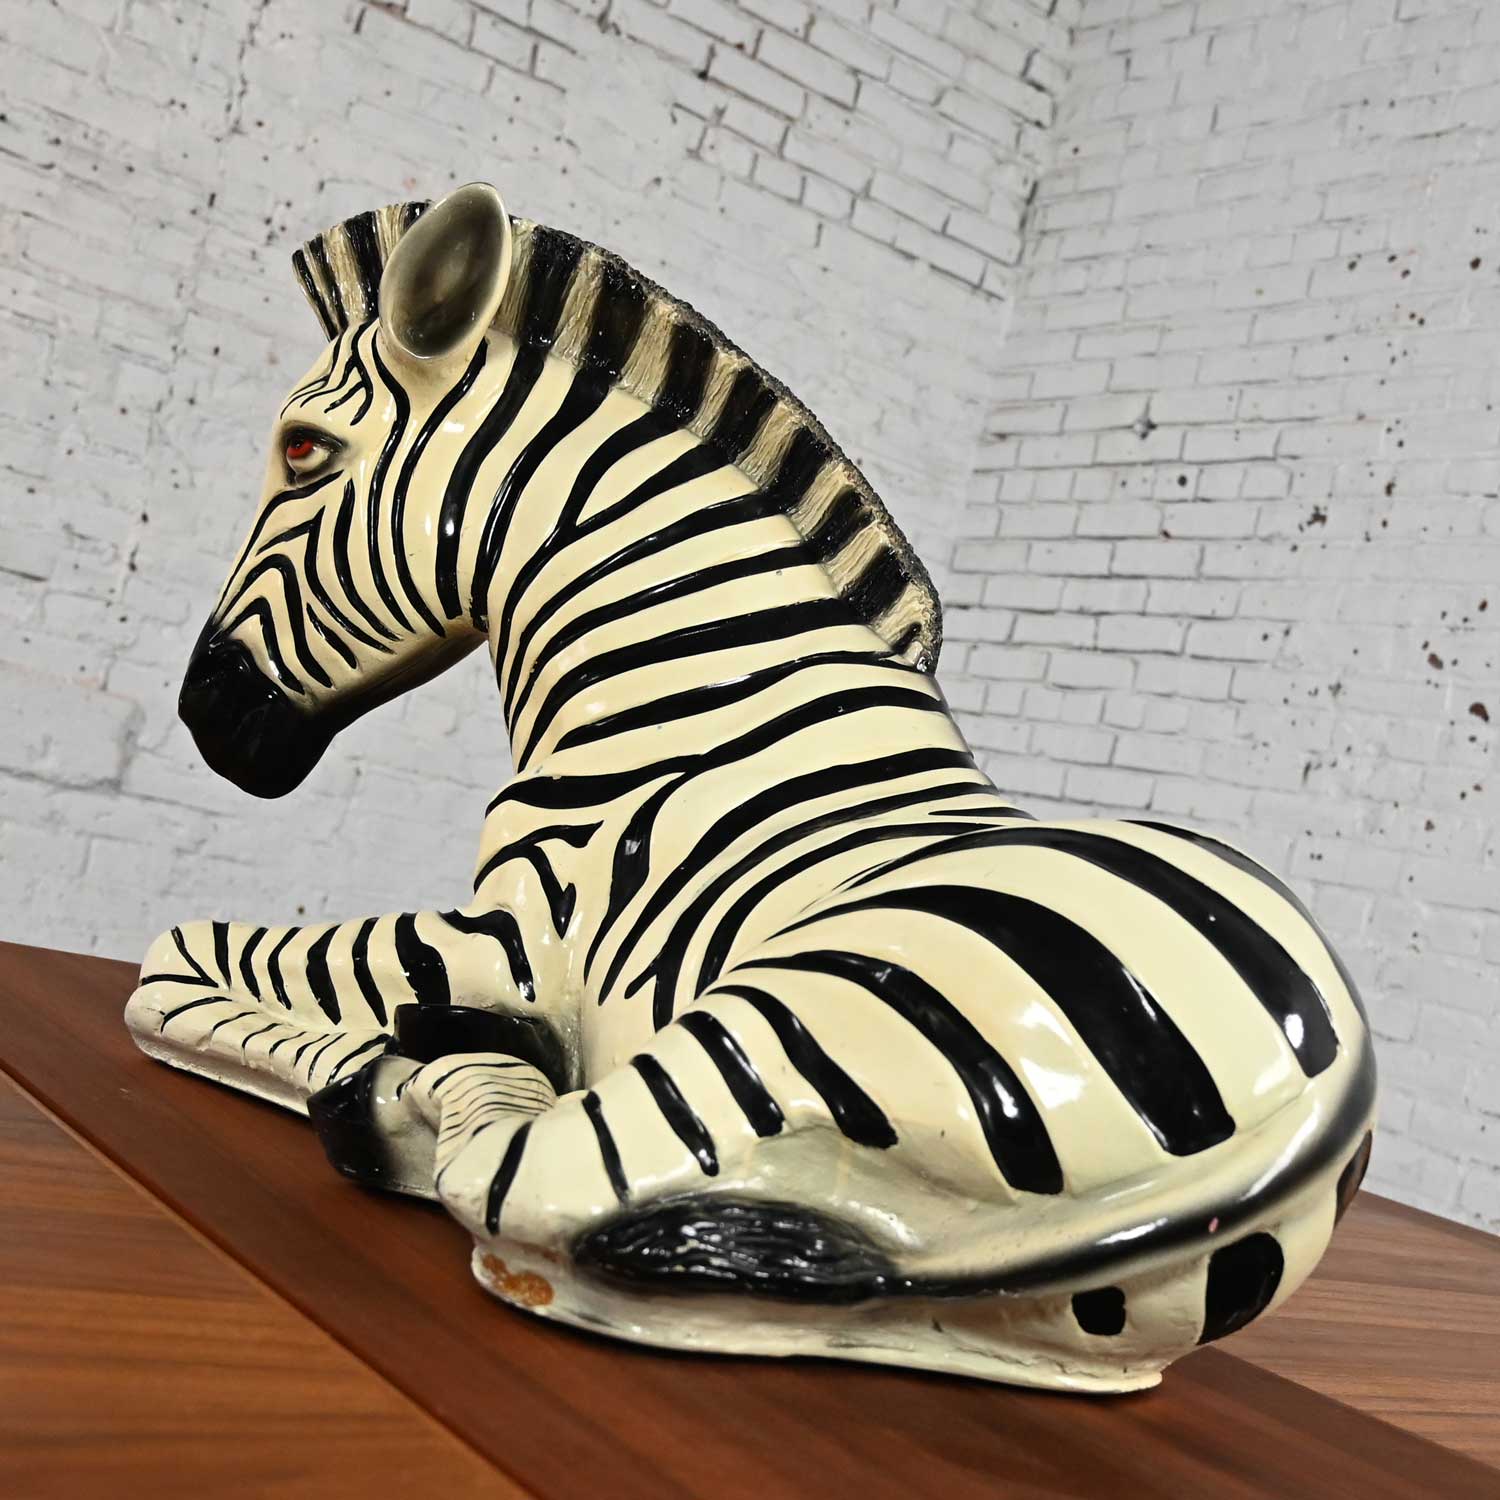 1970’s Marwal Industries Large Scale Zebra Molded Resin Statue or Sculpture